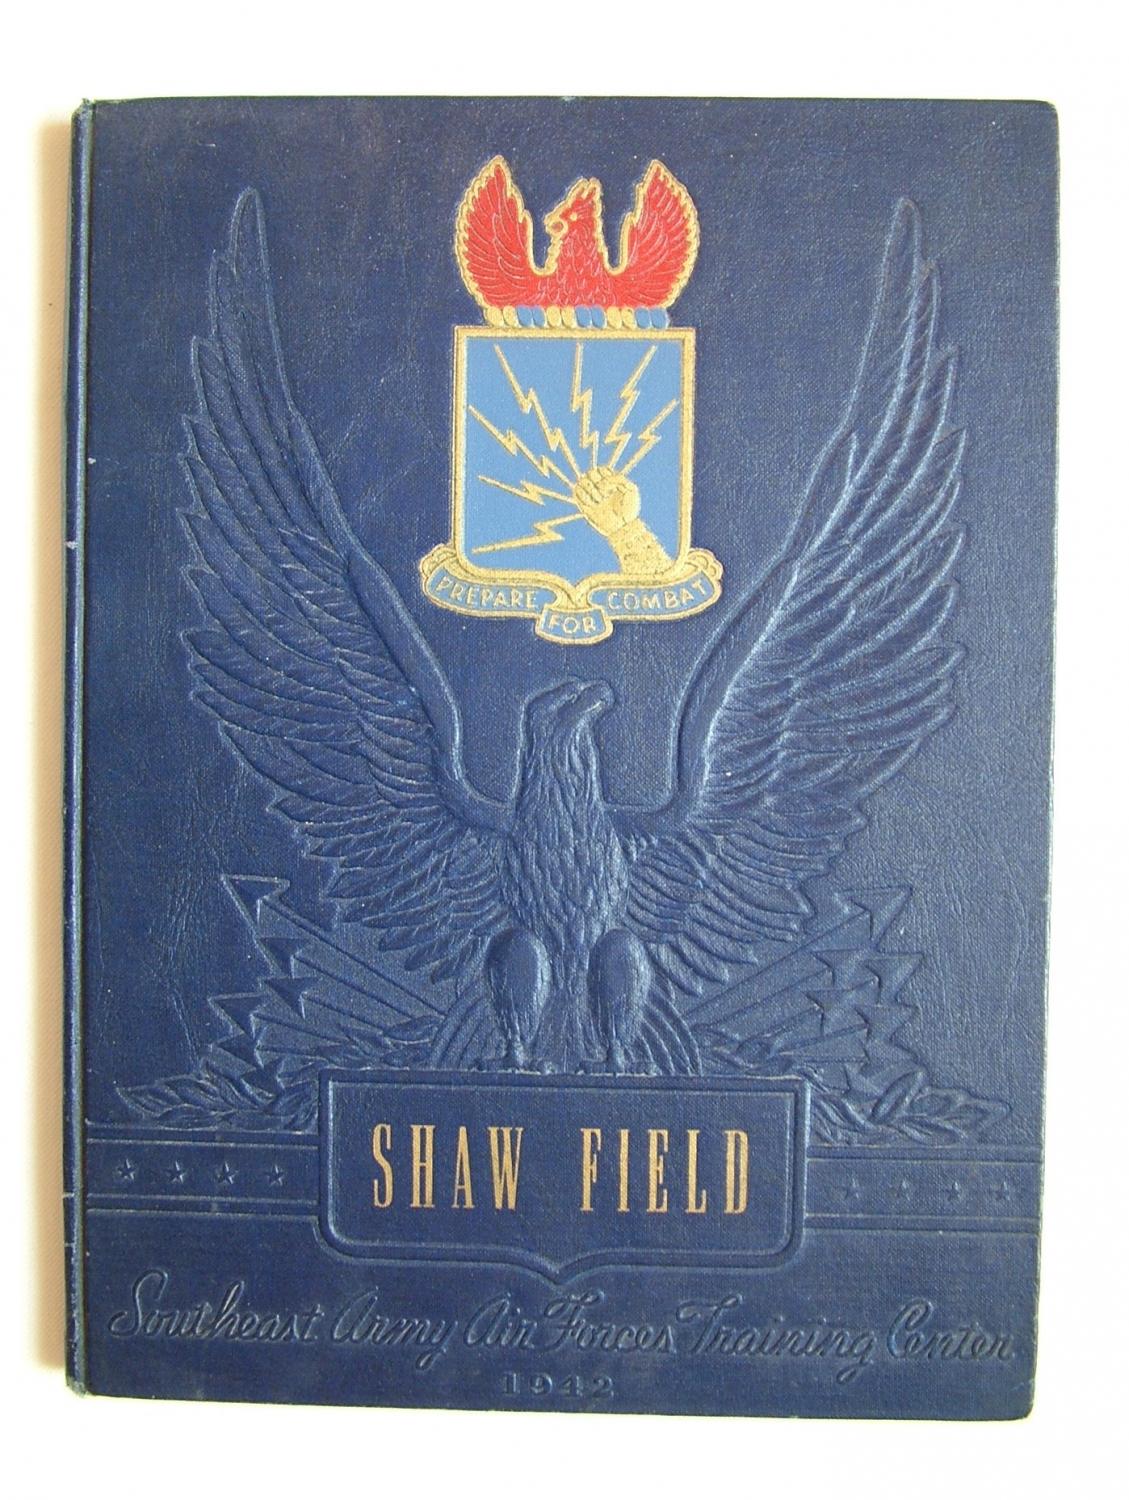 USAAF Shaw Field Yearbook, 1942